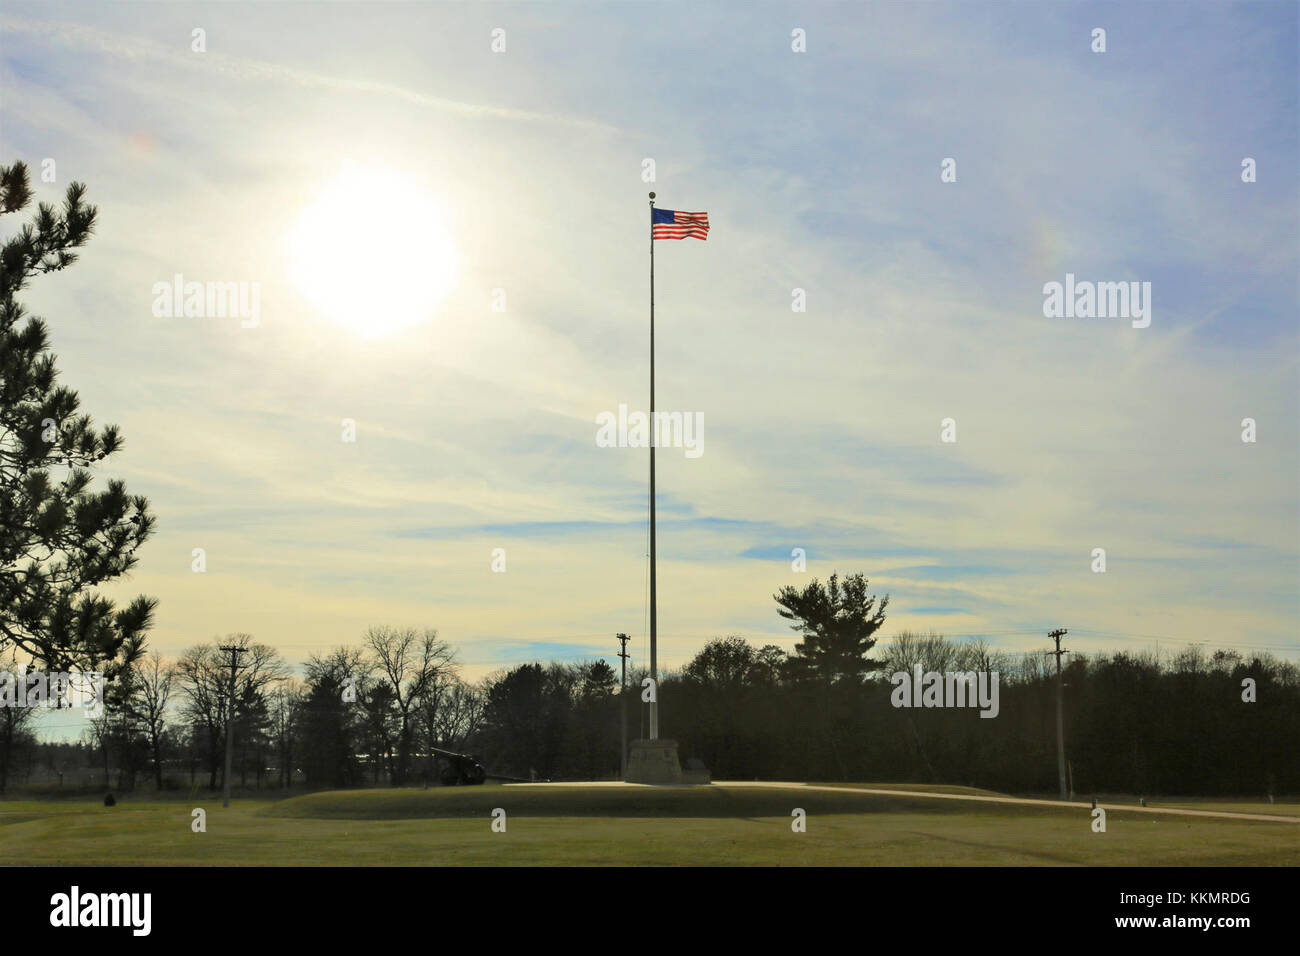 The flag of the United States of America is brightened by a backdrop of afternoon sun Nov. 27, 2017, while flying on the flagpole in front of Garrison Headquarters at Fort McCoy, Wis. The weather for late November was unseasonably warm with temperatures around 50 degrees Fahrenheit. (U.S. Army Photo by Scott T. Sturkol, Public Affairs Office, Fort McCoy, Wis.) Stock Photo